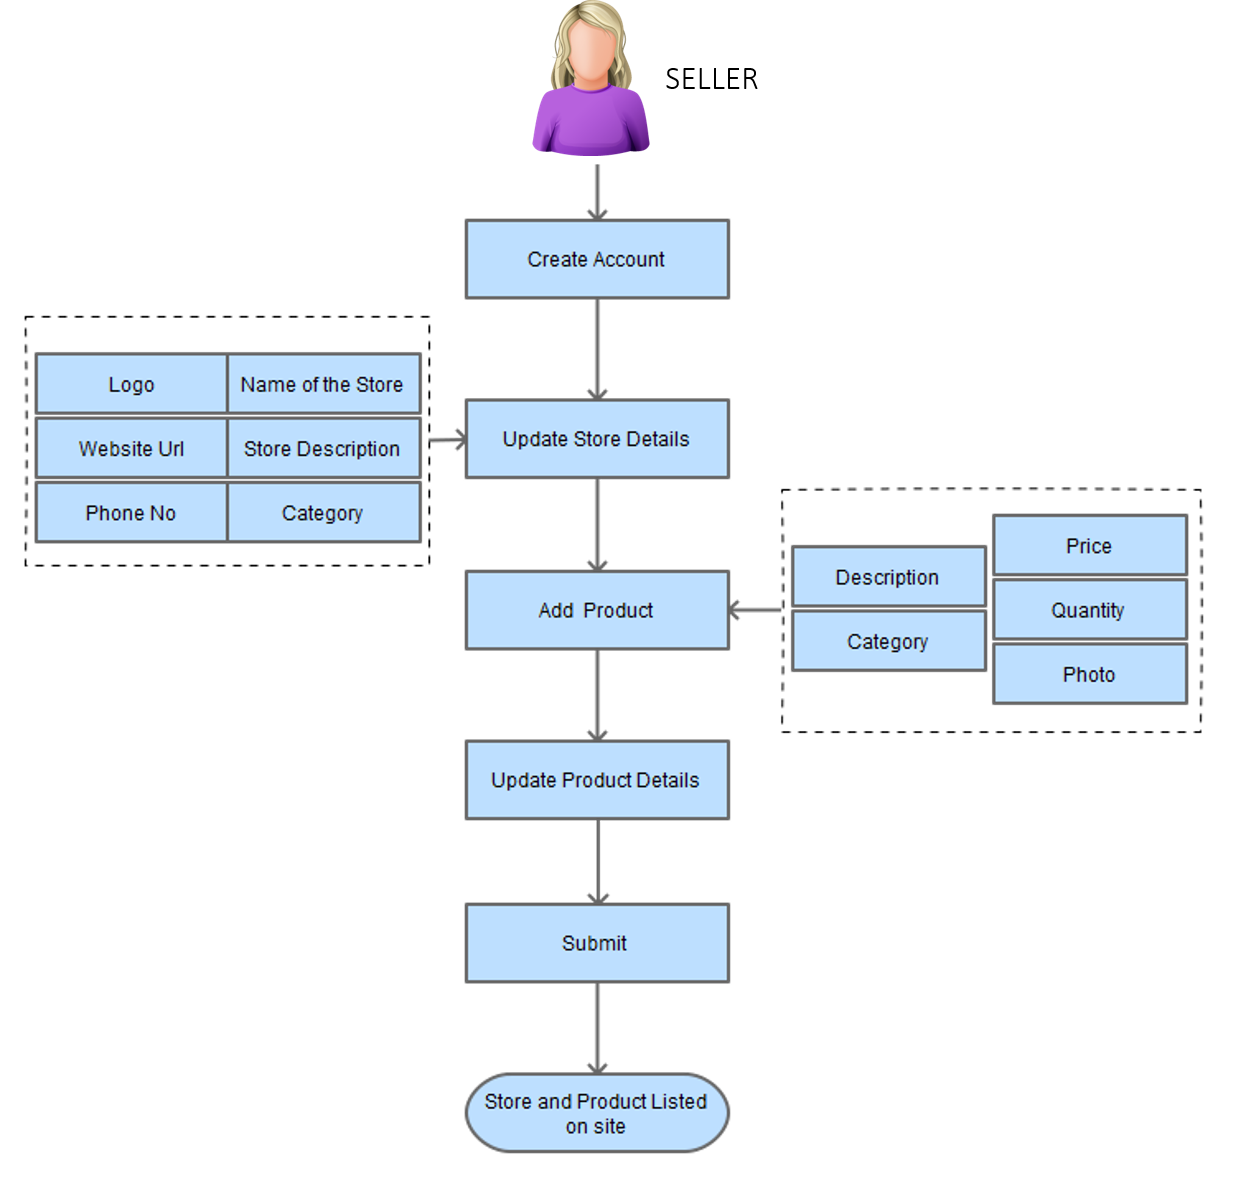 Process flow diagram for Product Listing